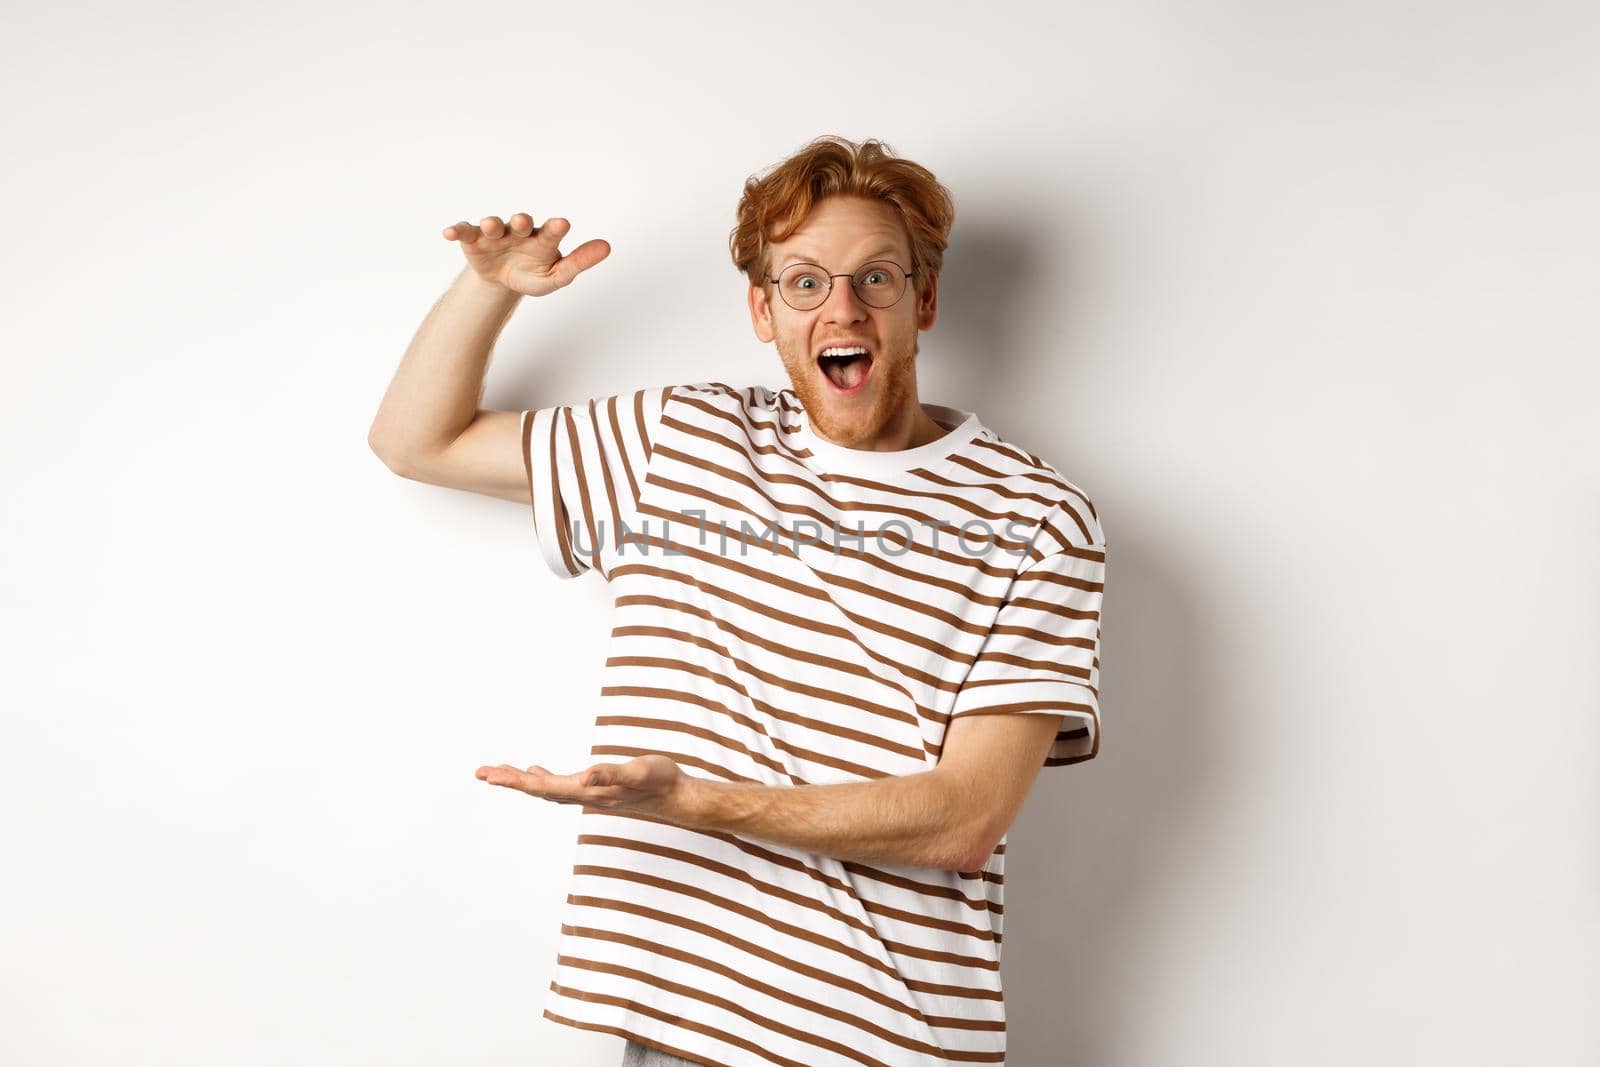 Amazed redhead man in glasses showing something large size and smiling at camera, saying wow, standing over white background.